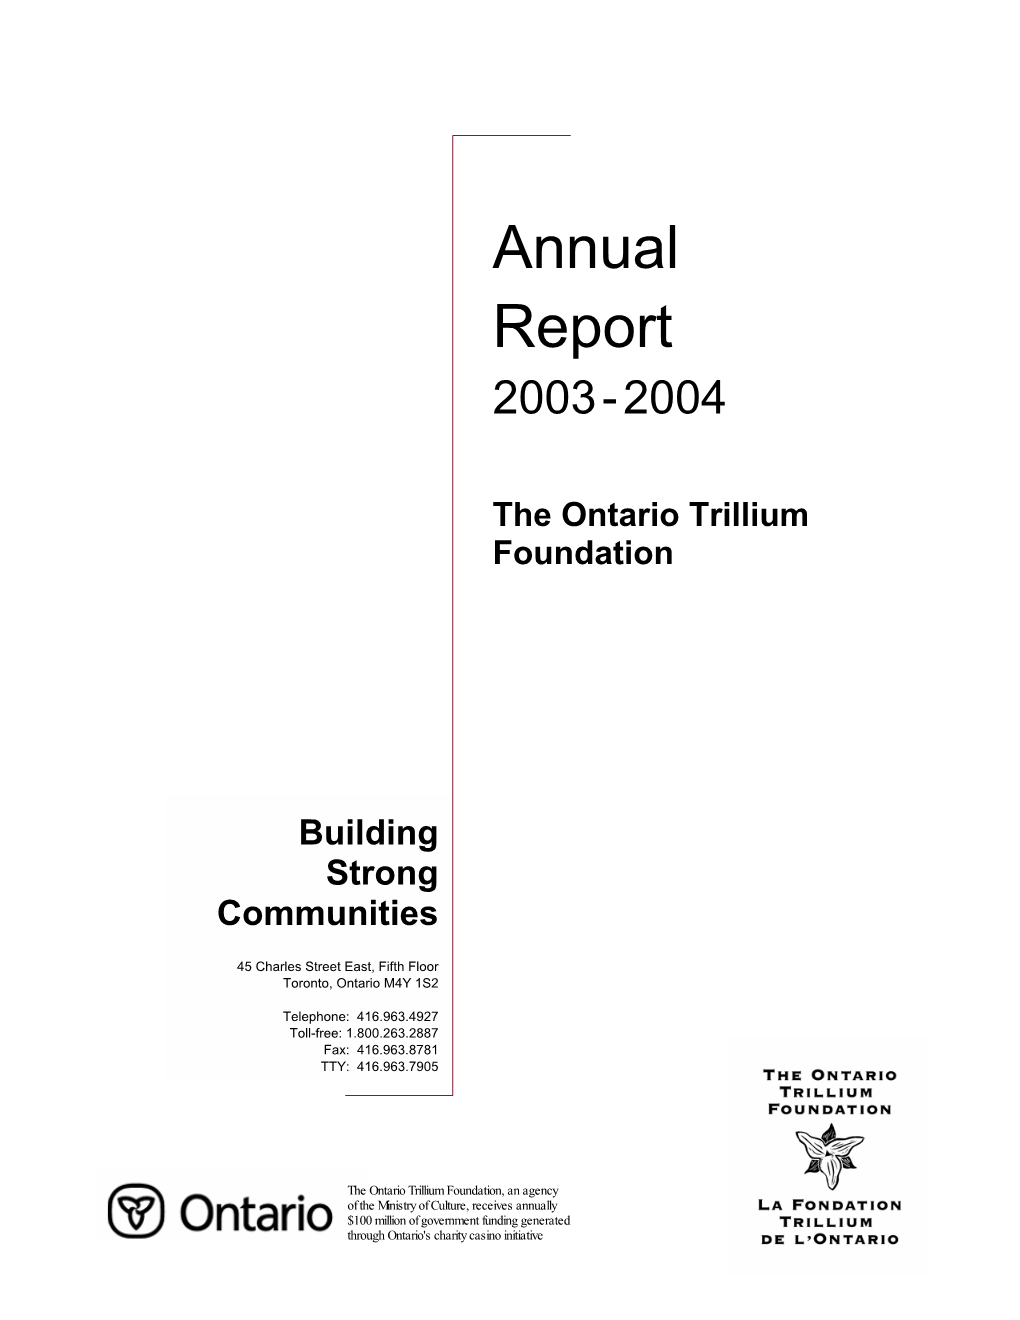 Annual Report for the Fiscal Year 2003-2004